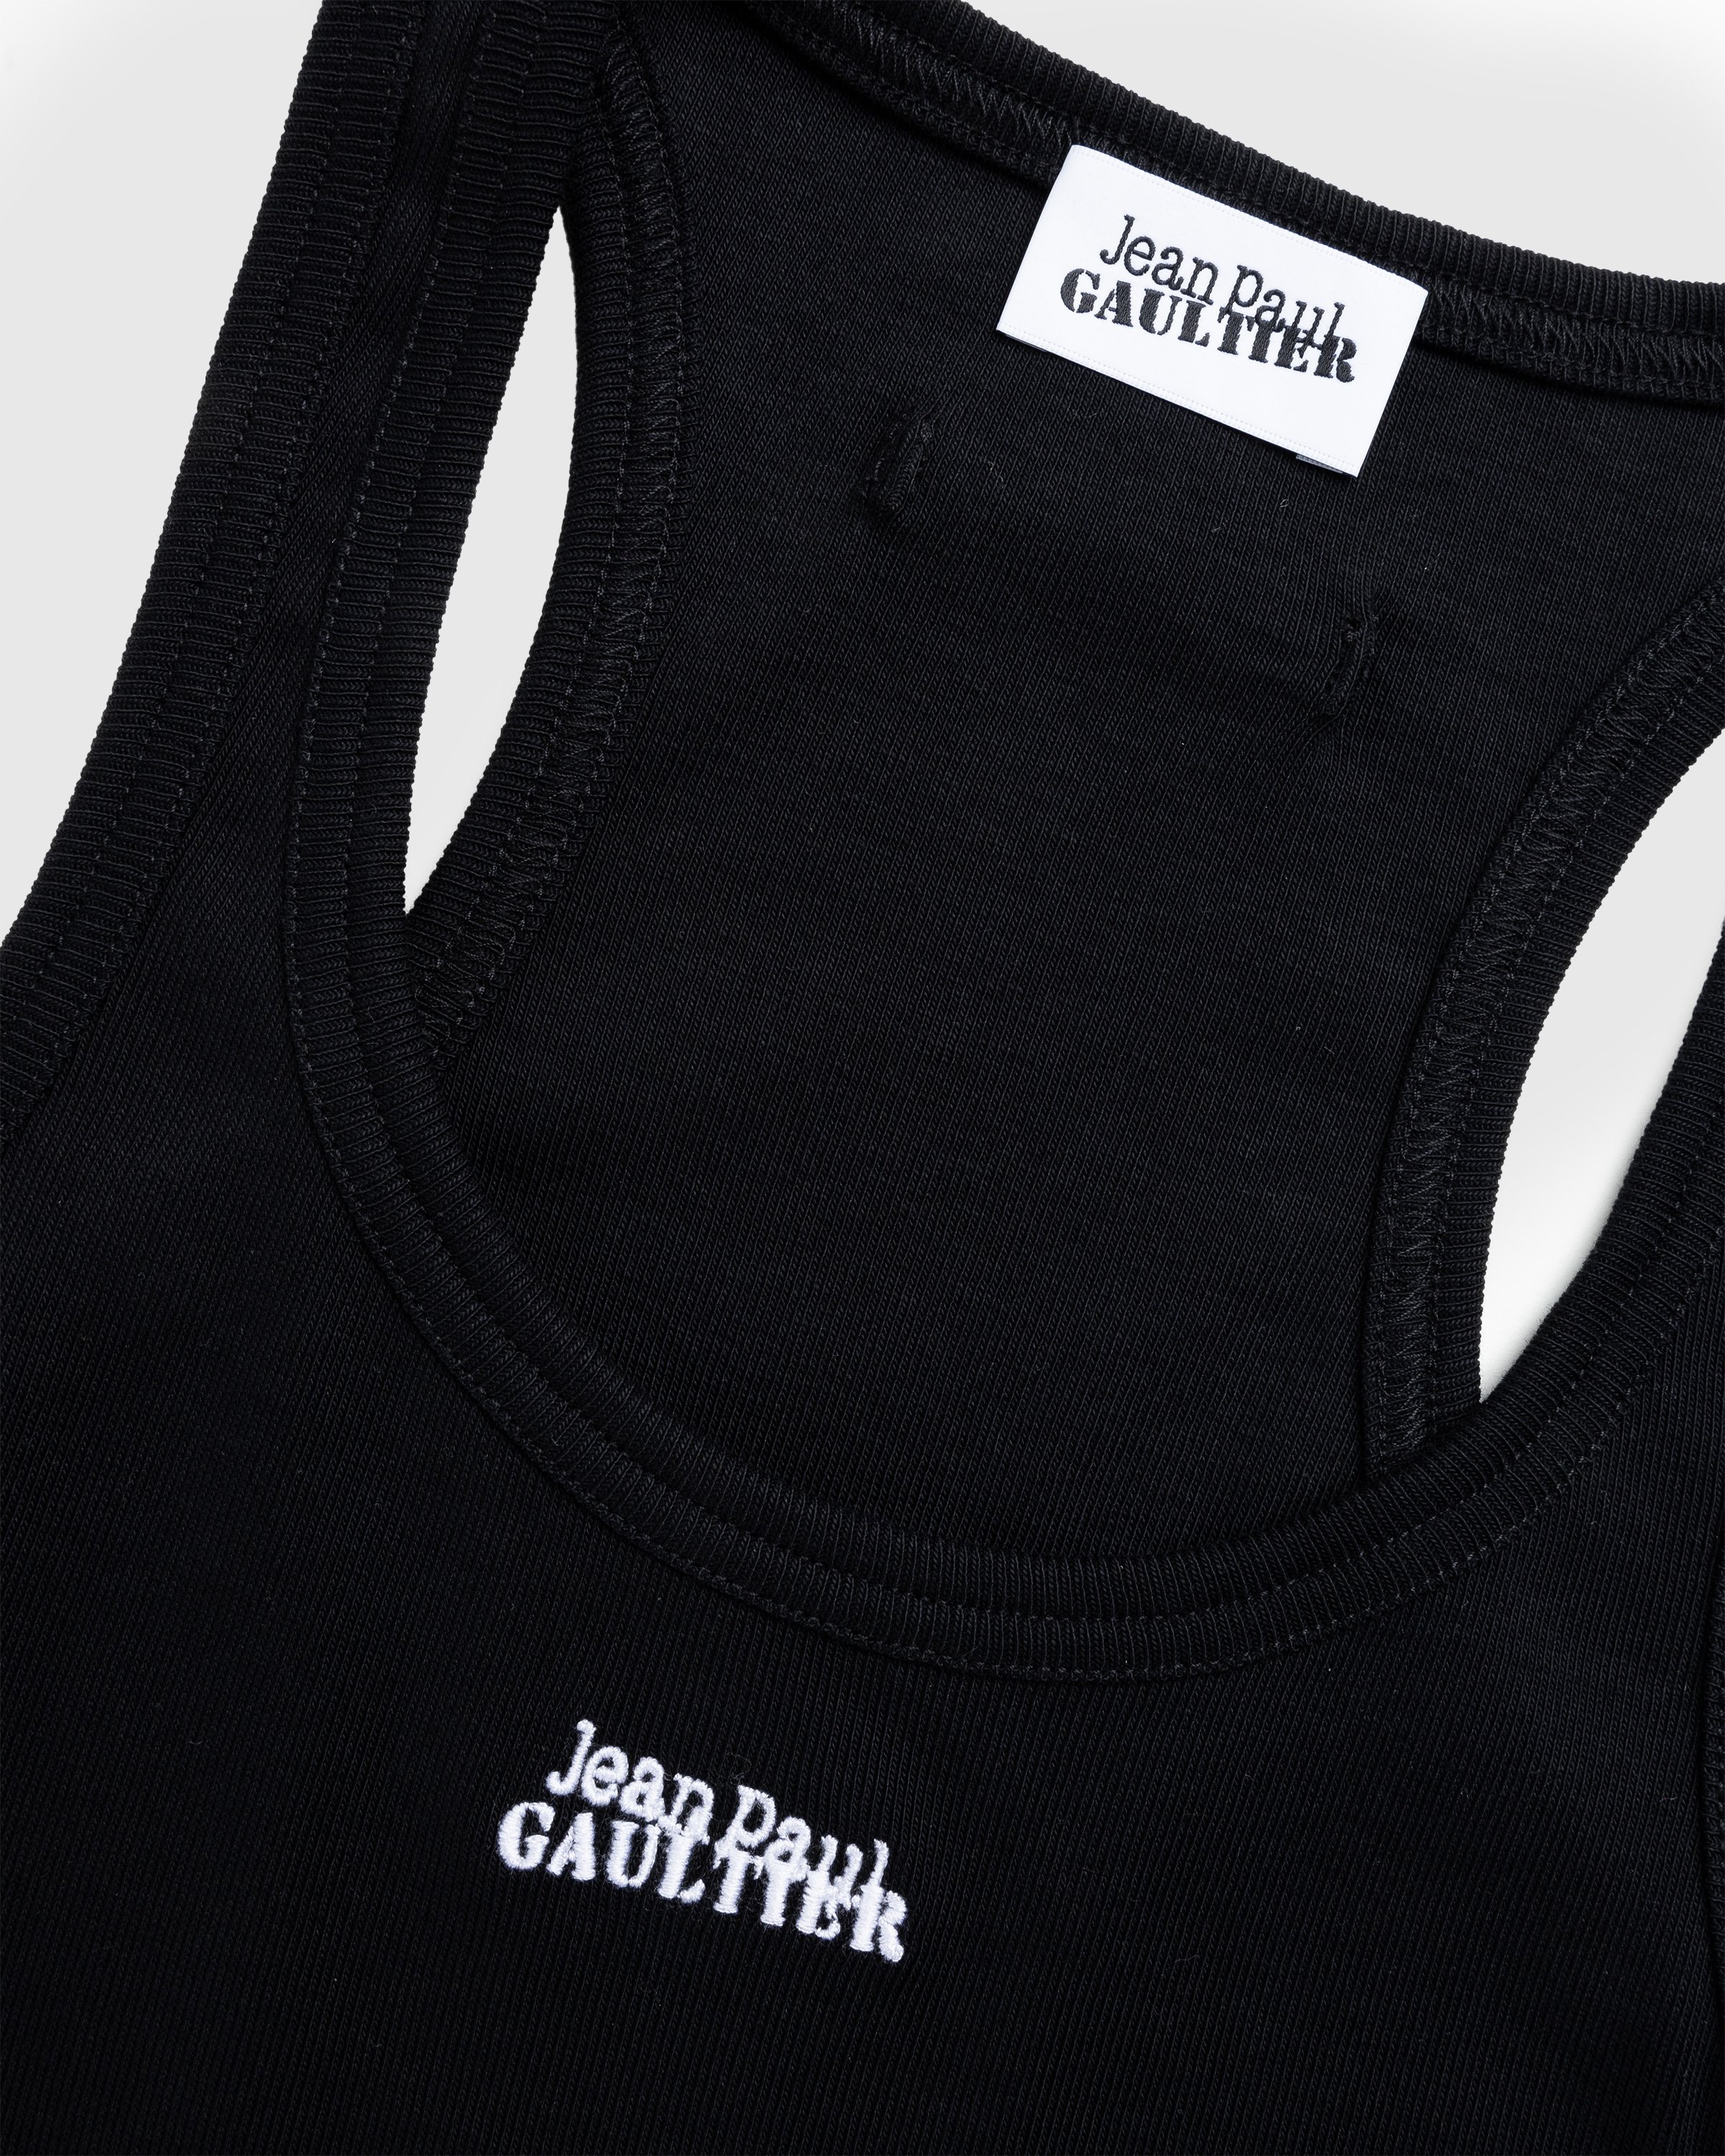 Jean Paul Gaultier - Laced Tank Top Black - Clothing - Black - Image 6